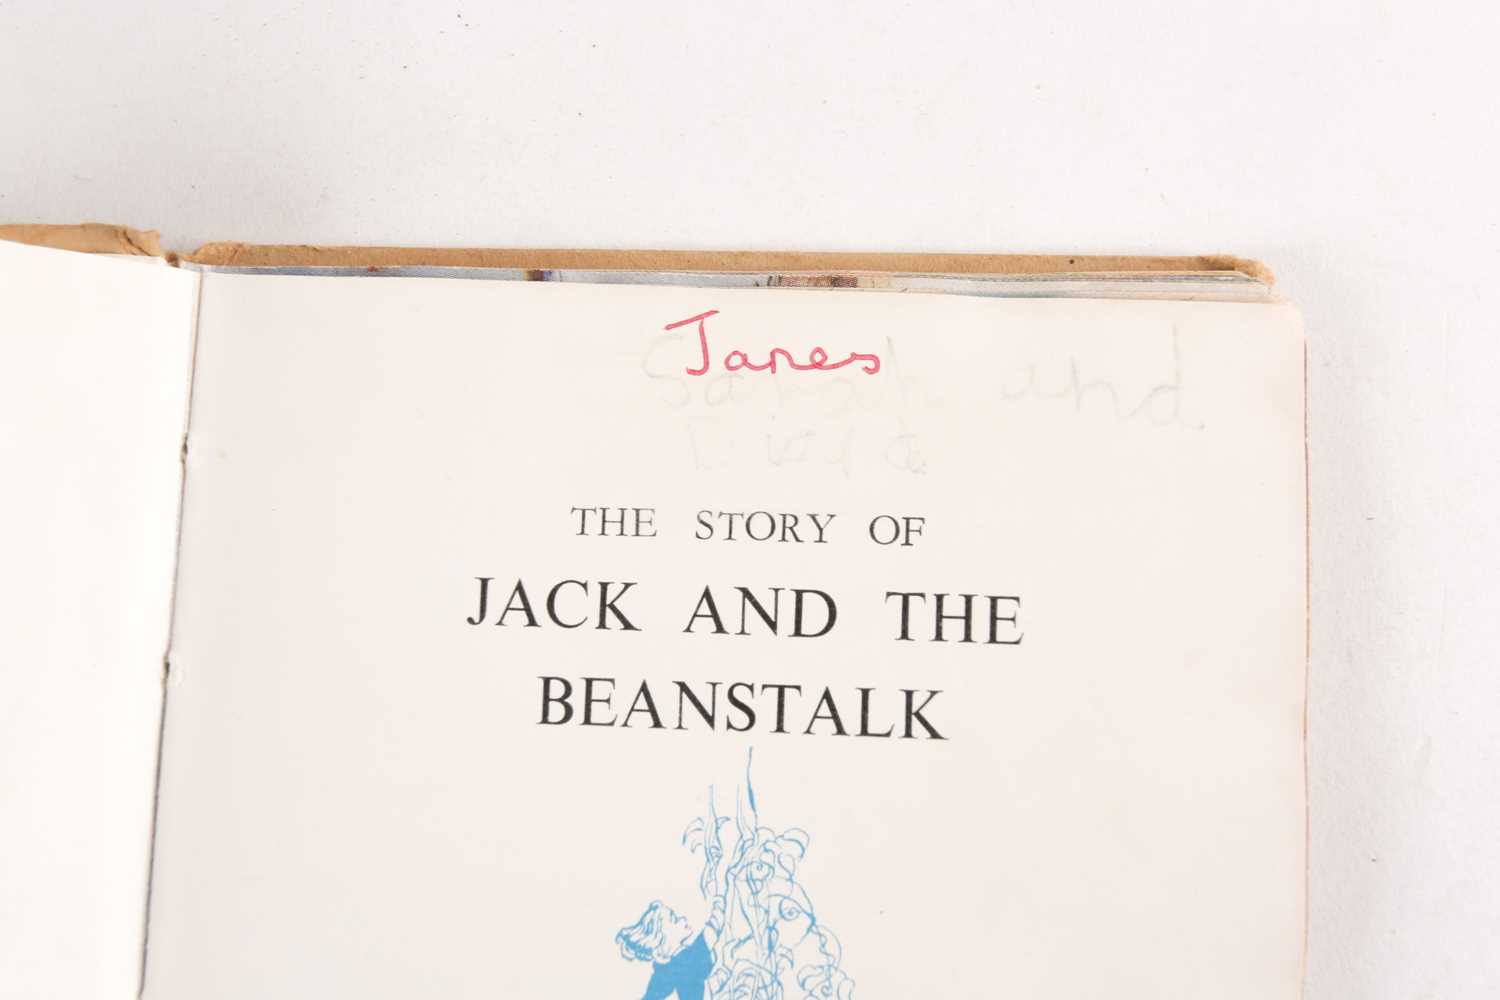 The personal copy of 'The Story of Jack and the Beanstalk' formerly belonging to the young - Image 10 of 12